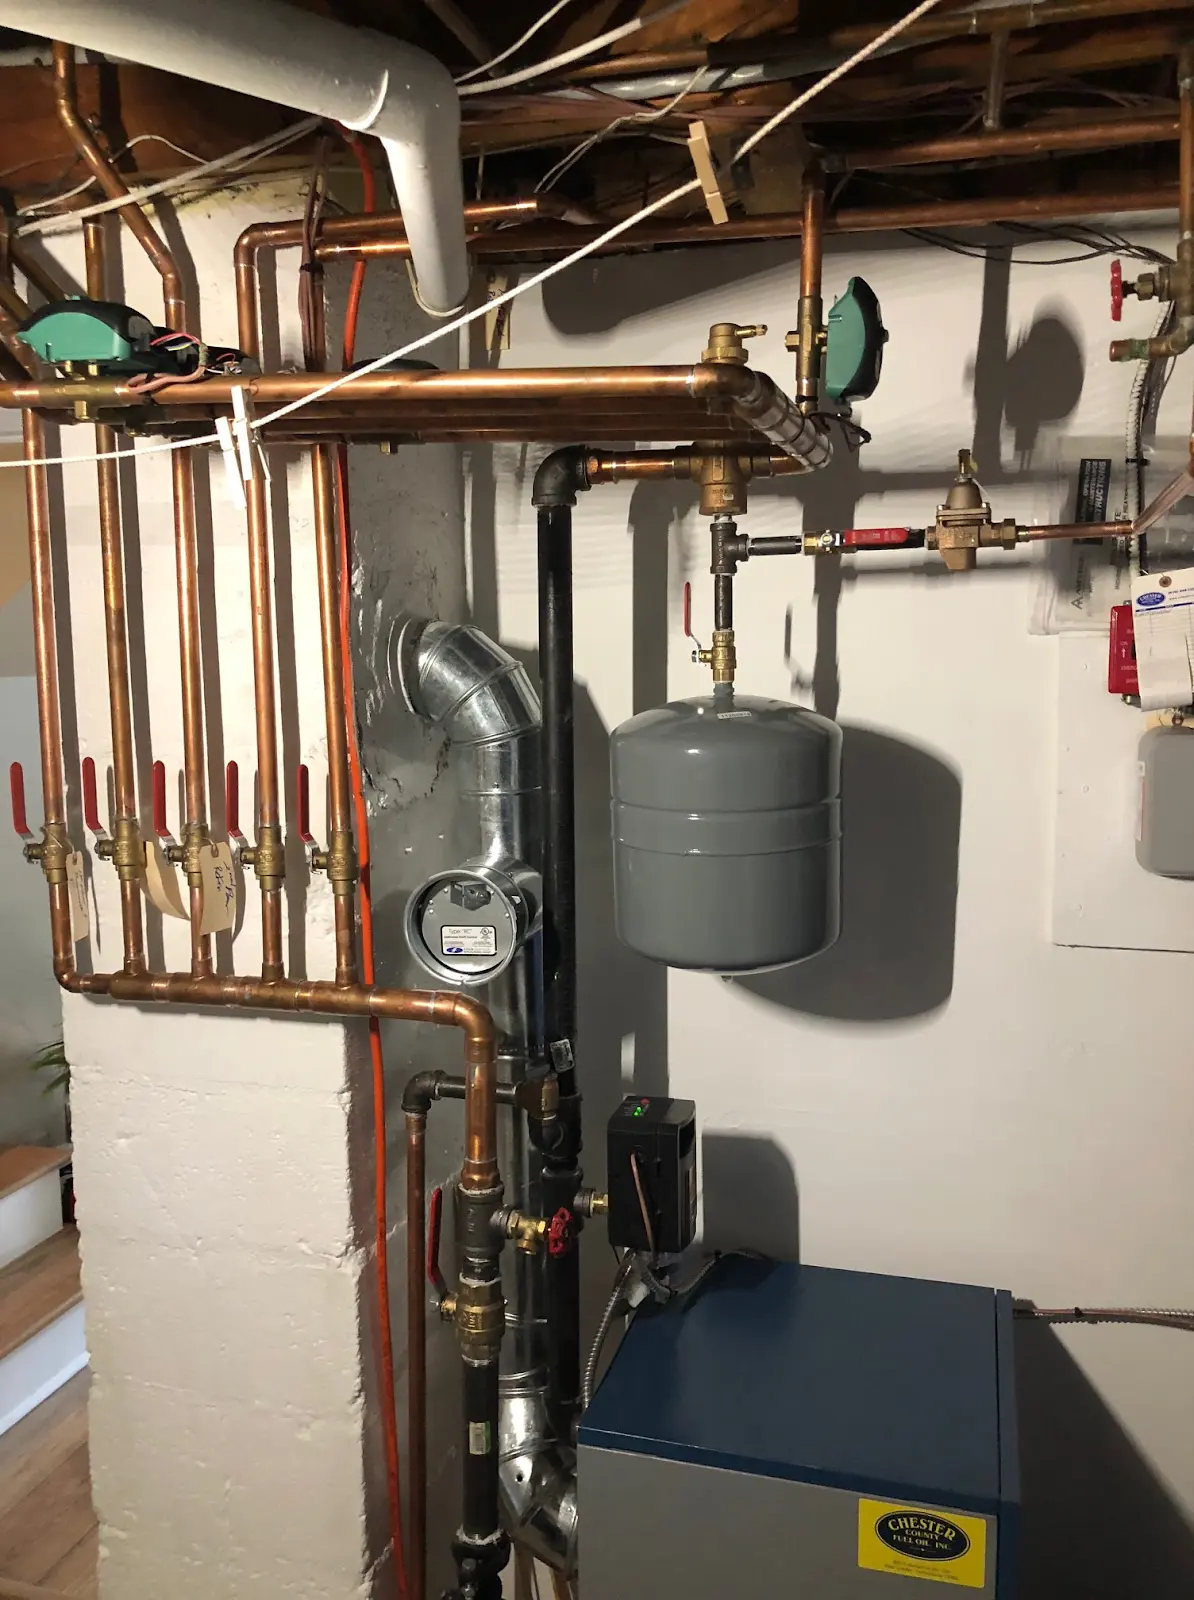 hvac install chester county, hvac chester county pa, hvac company chester county, hvac west chester pa, hvac repair west chester pa, air conditioning, heat pump, repair services, heating air conditioning, heating system, water heater replacement, heating services